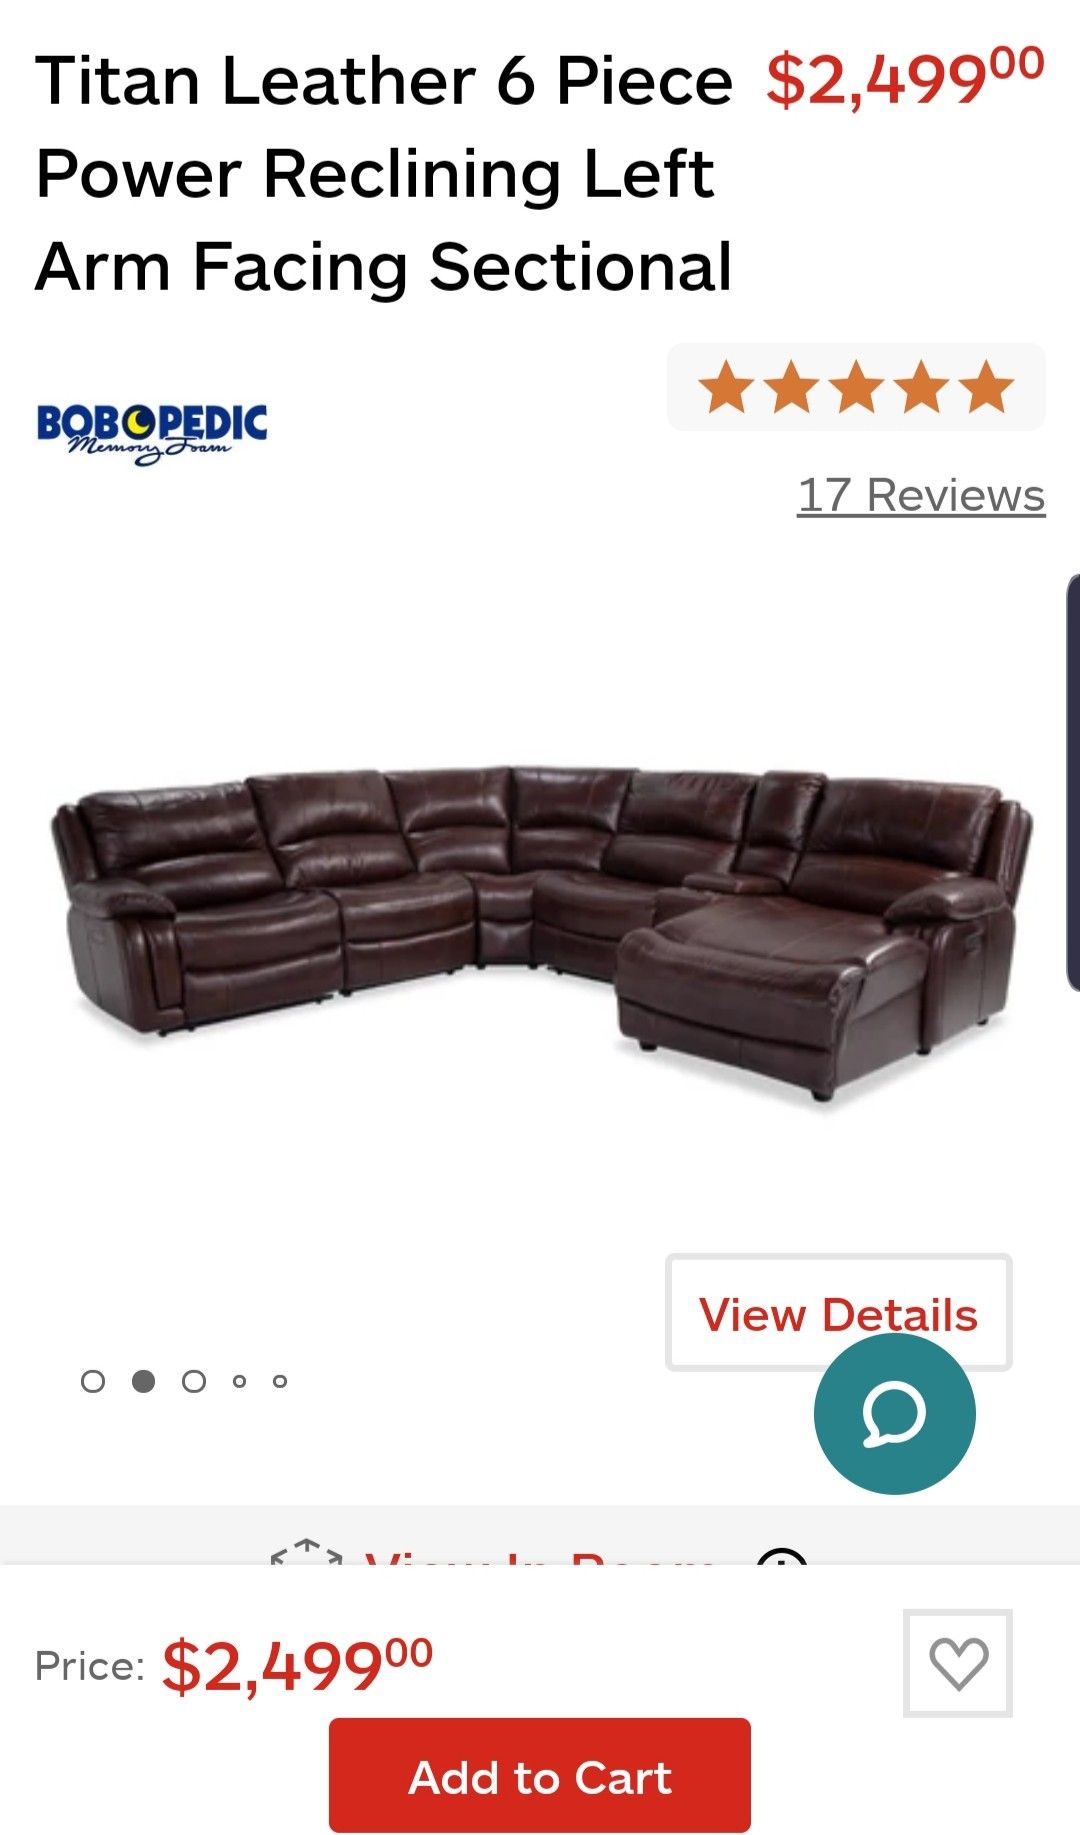 6 piece leather sectional couch/sofa